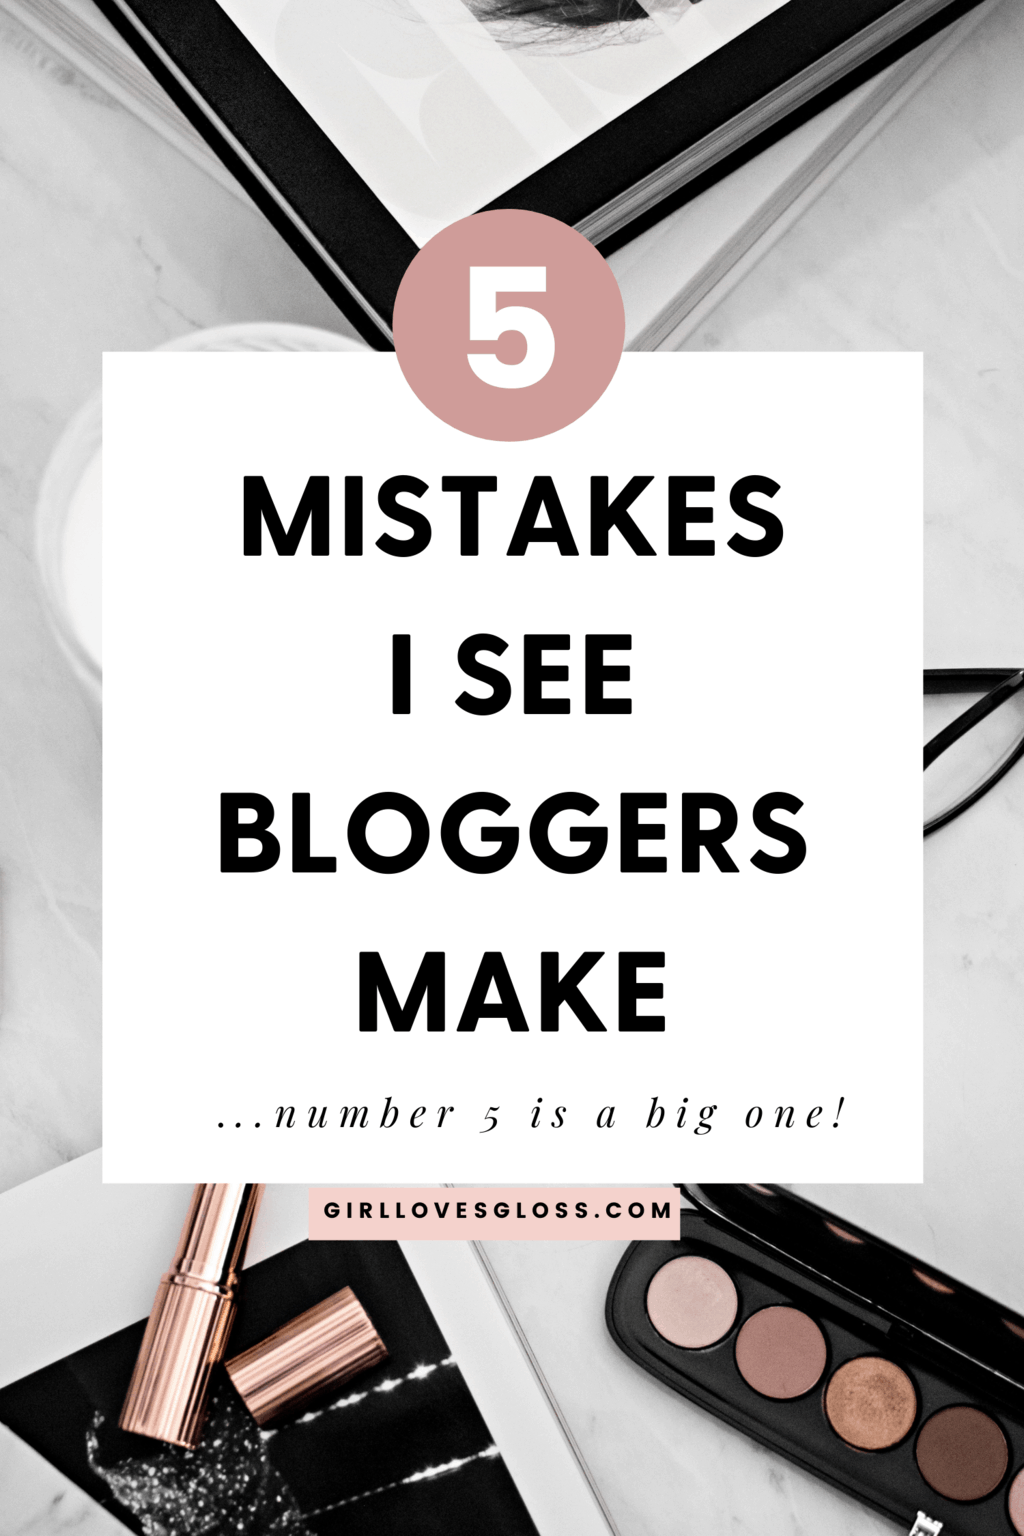 5 Mistakes I see Bloggers make